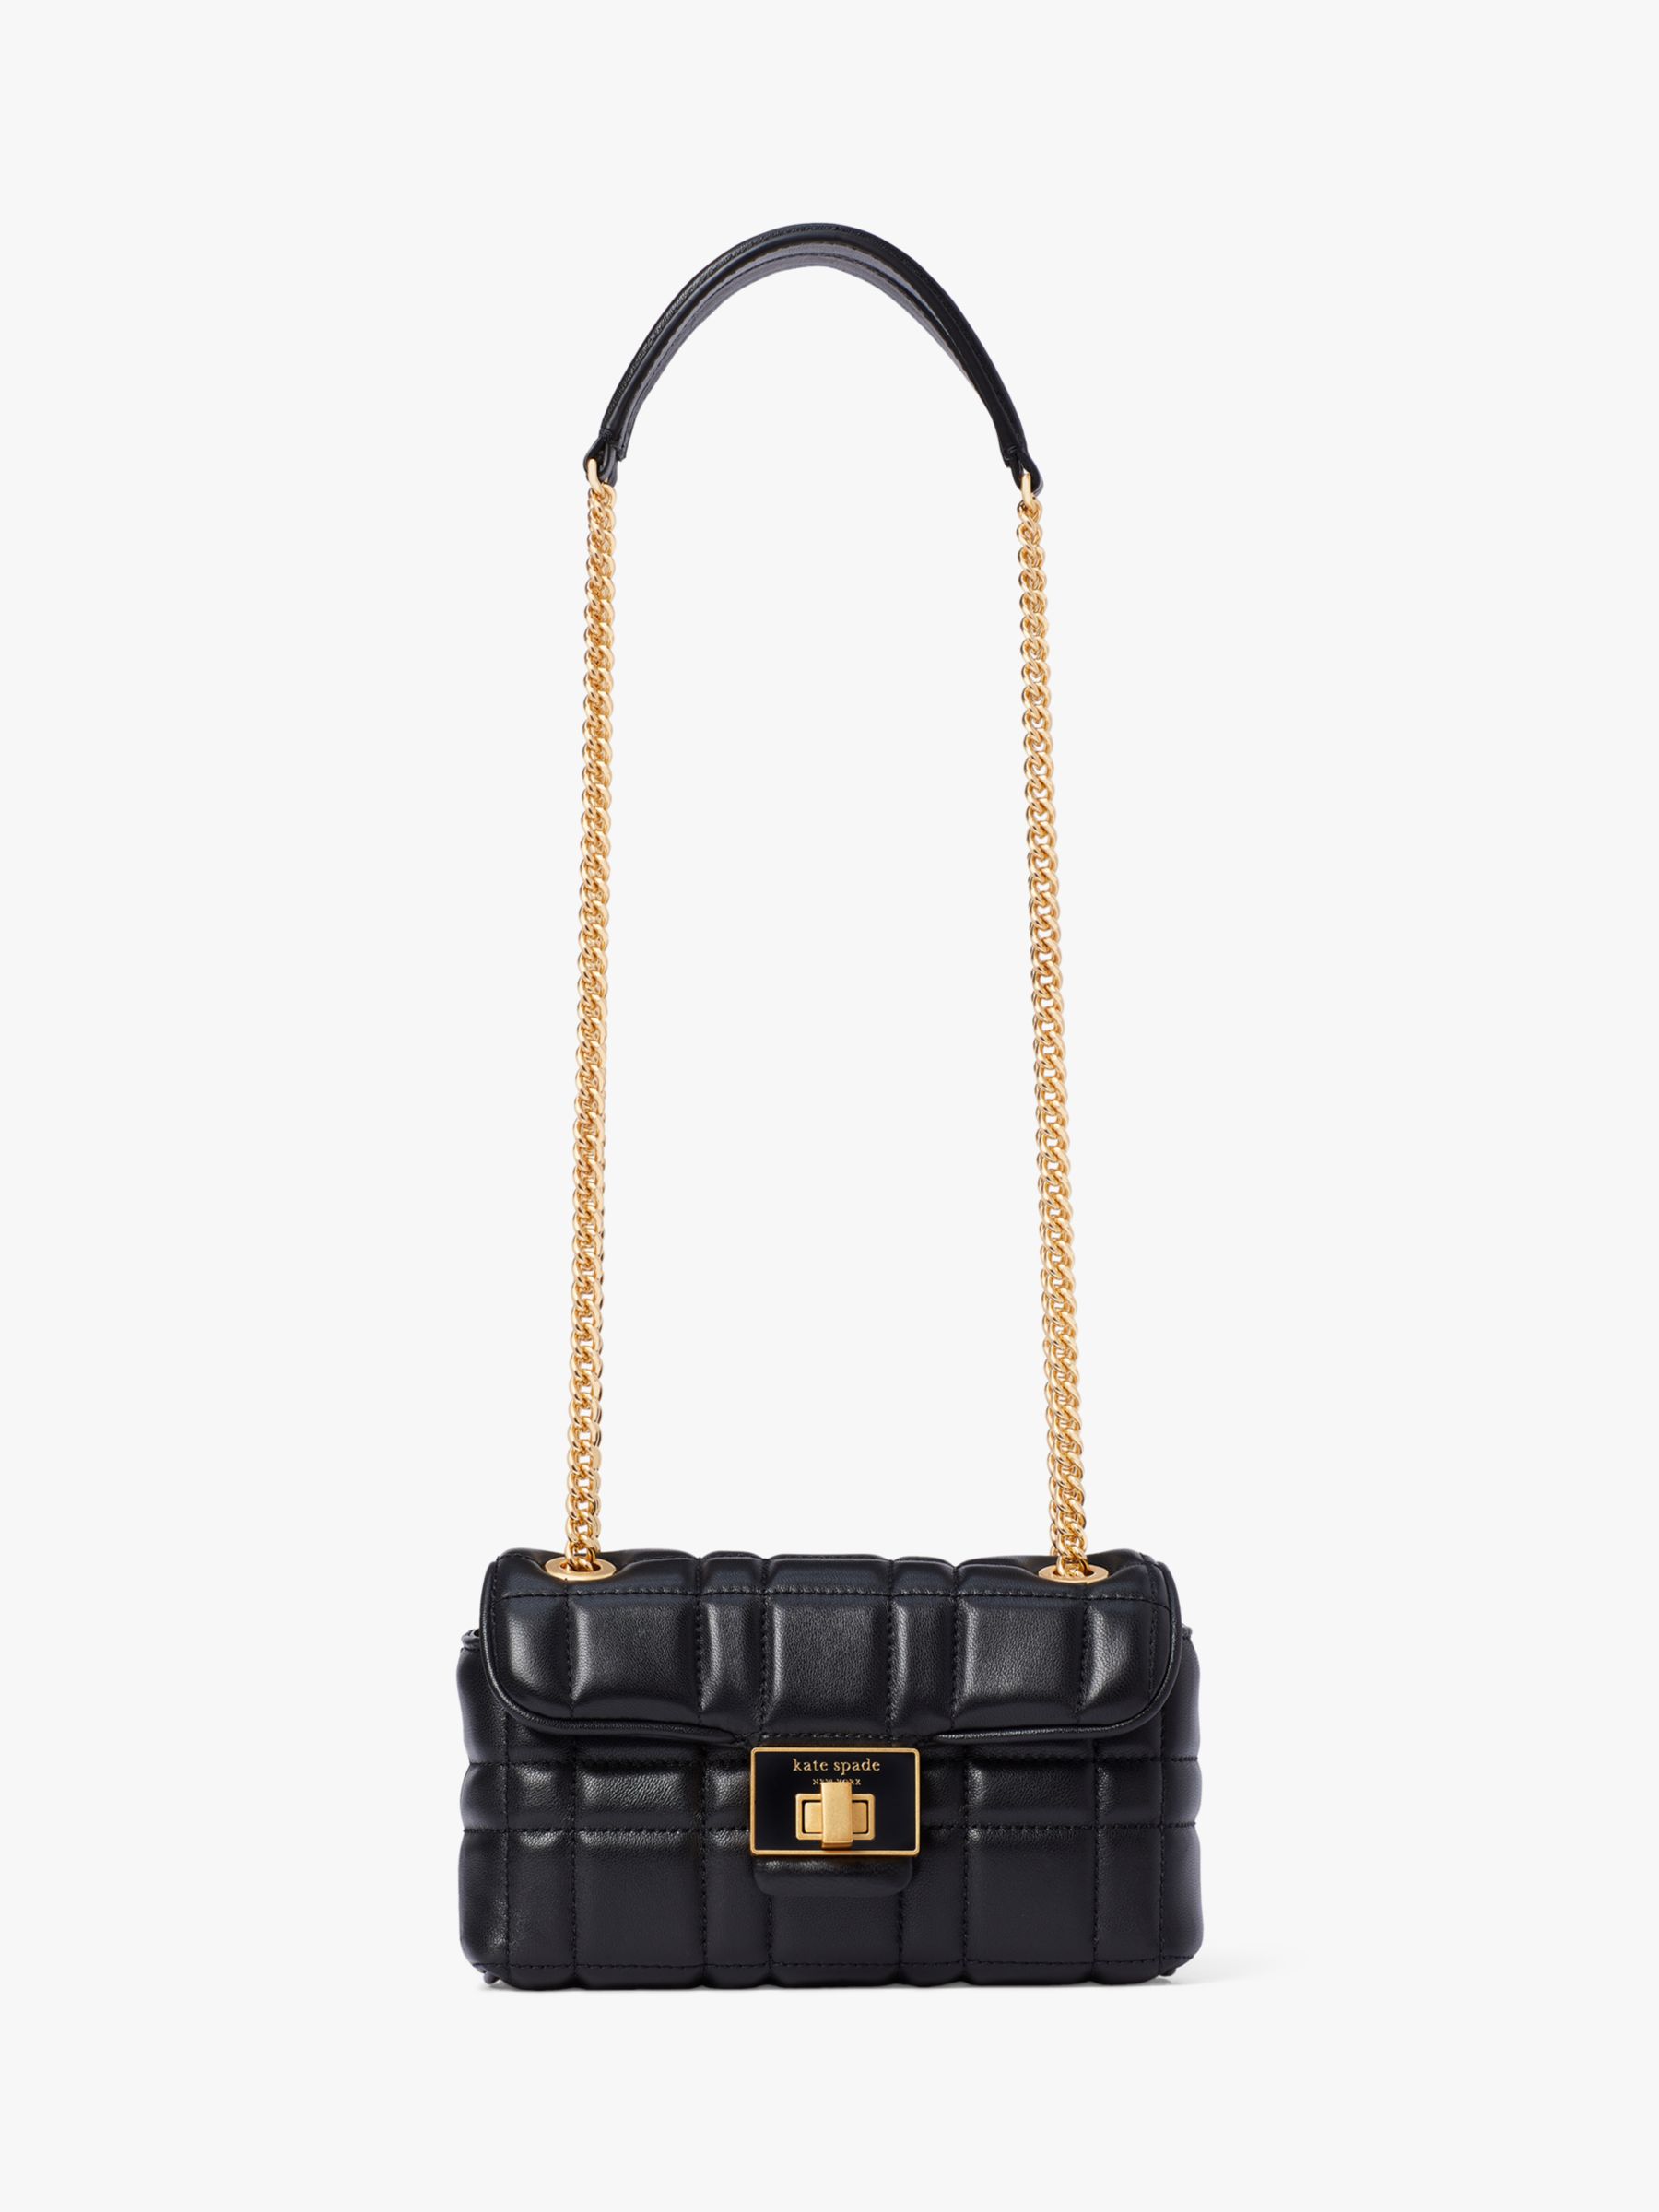 kate spade new york Leather Quilted Cross Body Bag, Black at John Lewis &  Partners